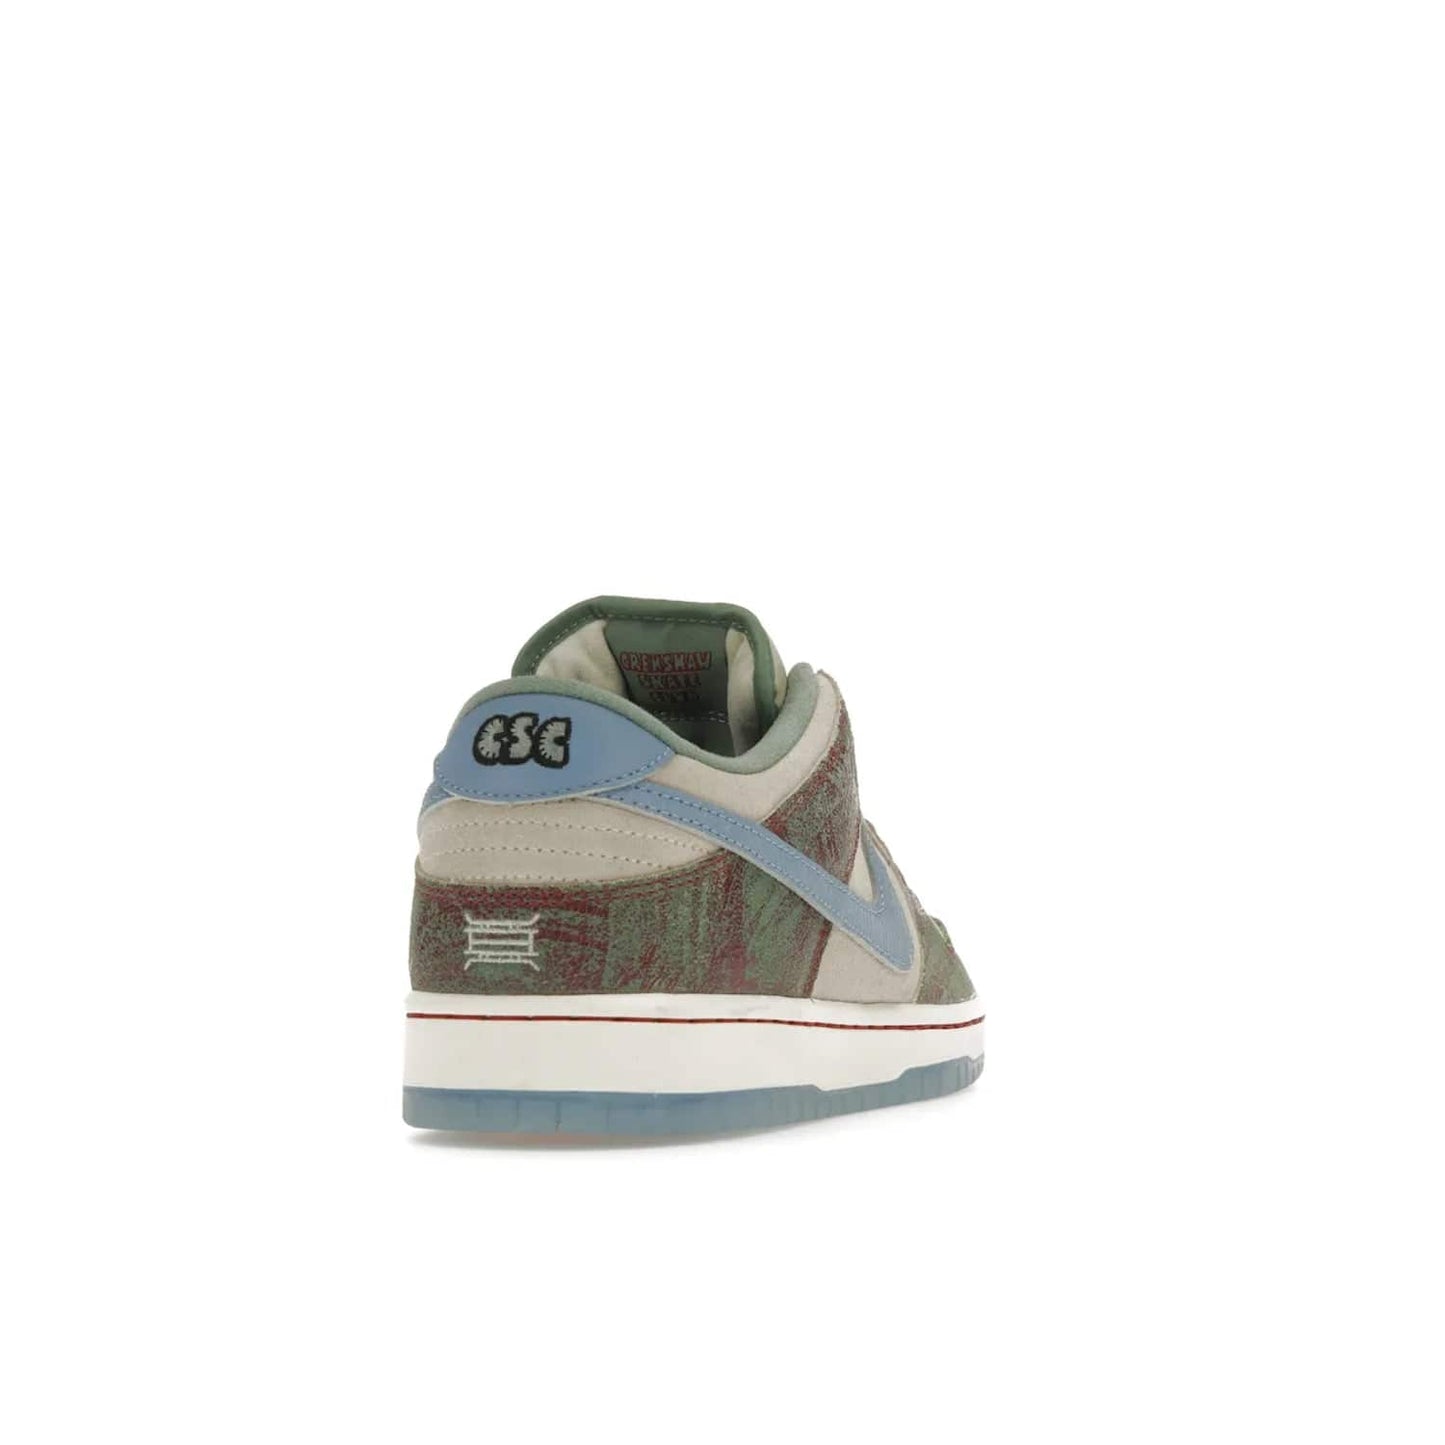 Nike SB Dunk Low Crenshaw Skate Club - Image 30 - Only at www.BallersClubKickz.com - Introducing the Nike SB Dunk Low Crenshaw Skate Club! Classic skate shoes with Sail and Light Blue upper, Cedar accents, padded collars and superior grip for comfortable, stable performance and style. Ideal for any skate session.